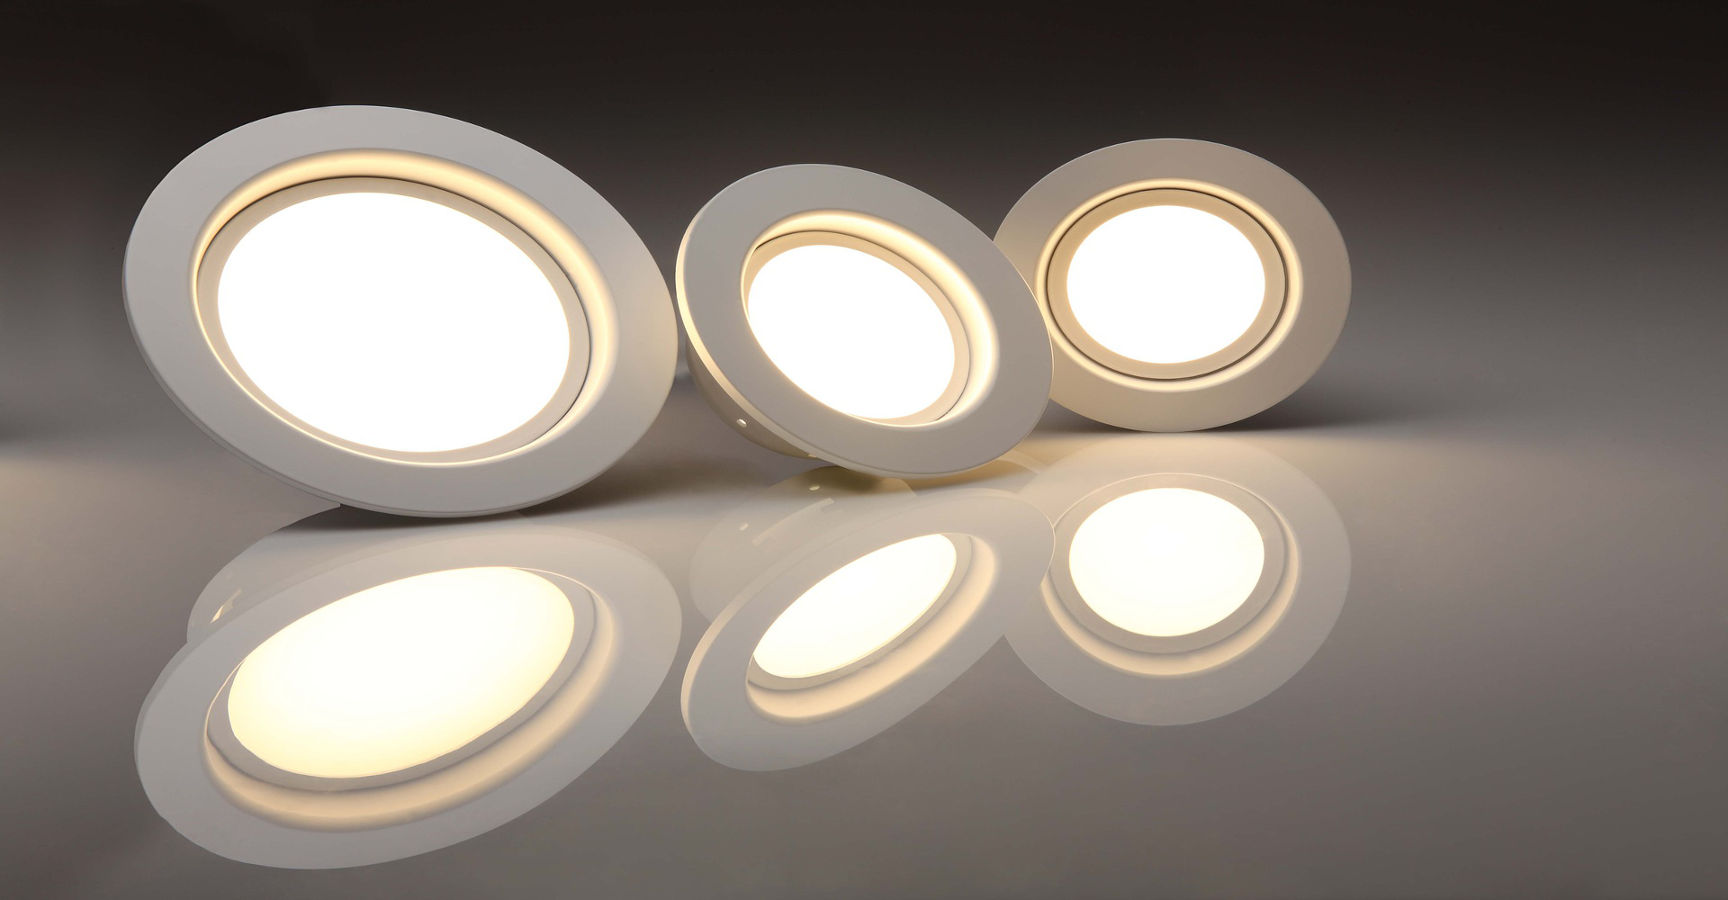 PVD treatment in the production of lighting systems